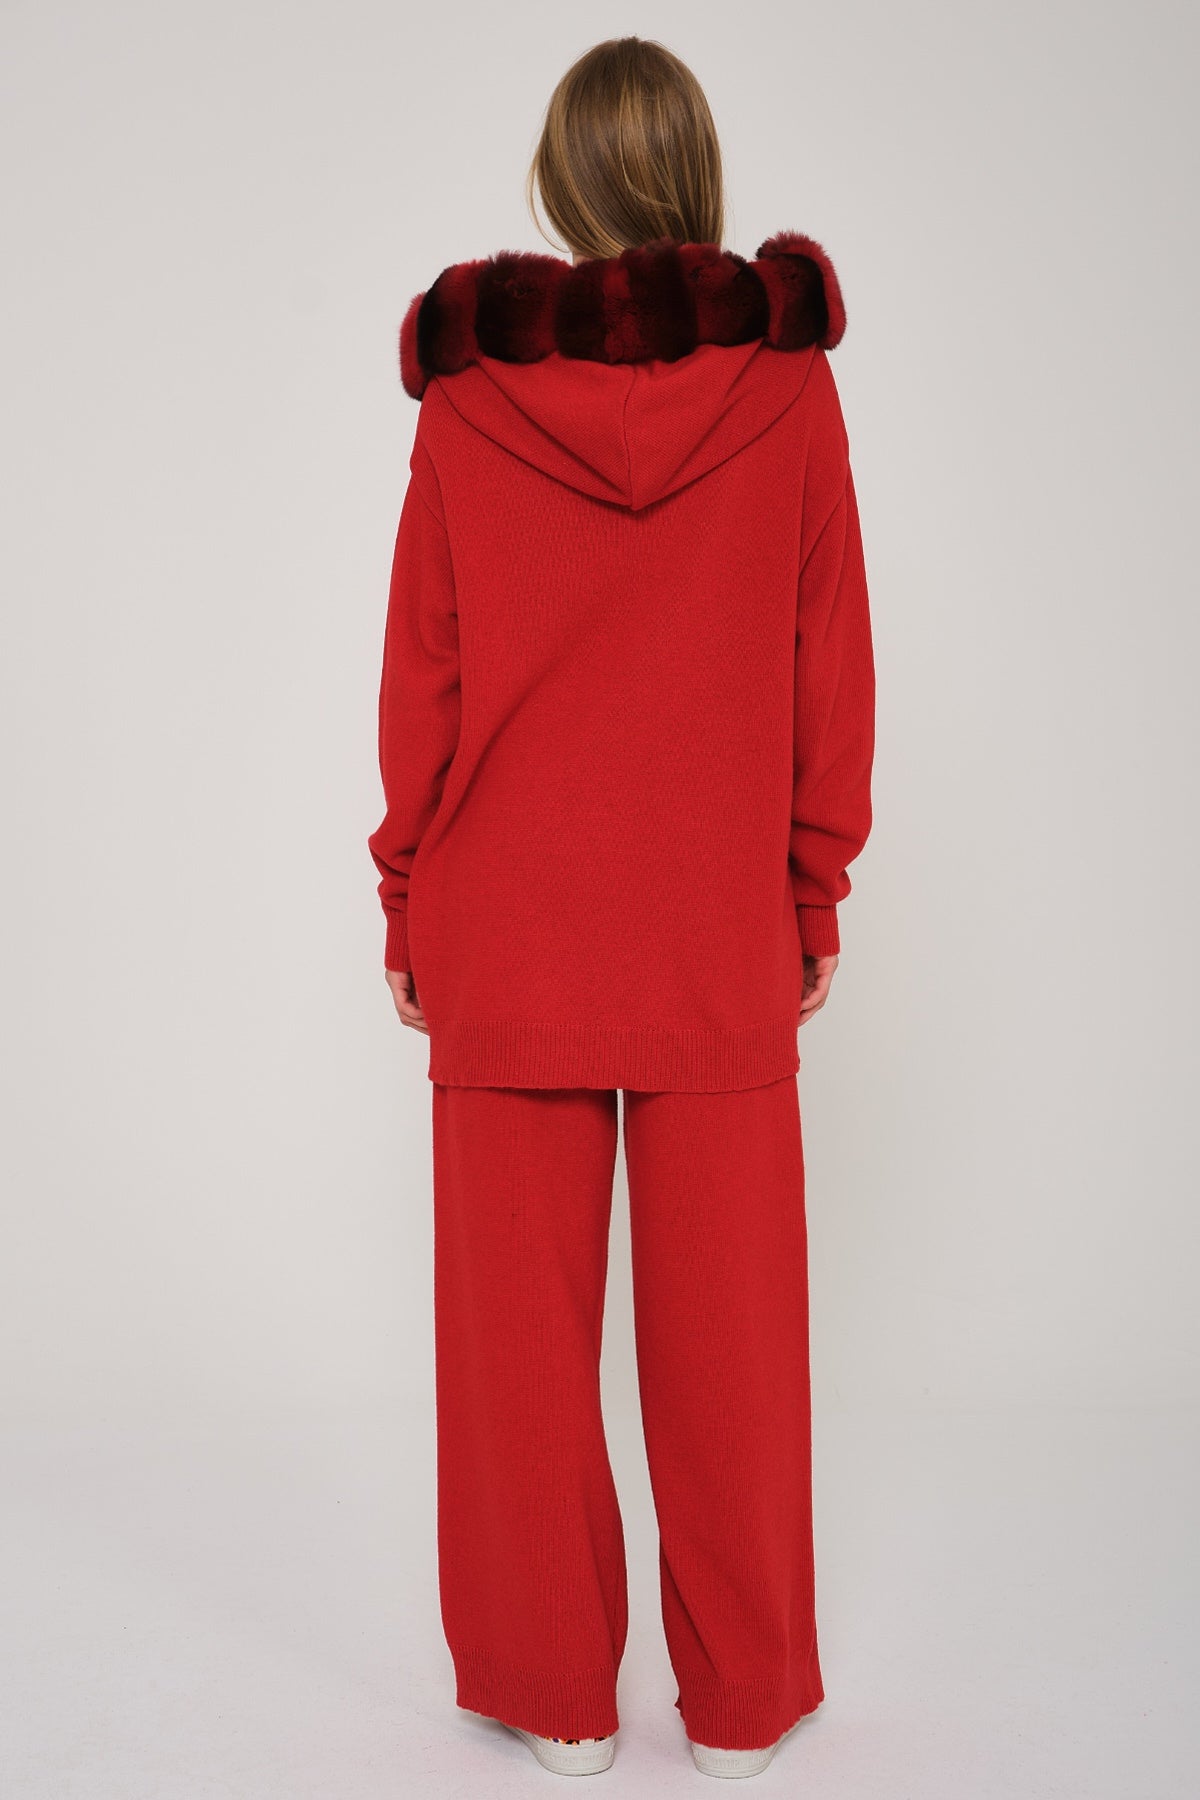 Red Chinchilla Fur Lined Hoodie & Pants Set